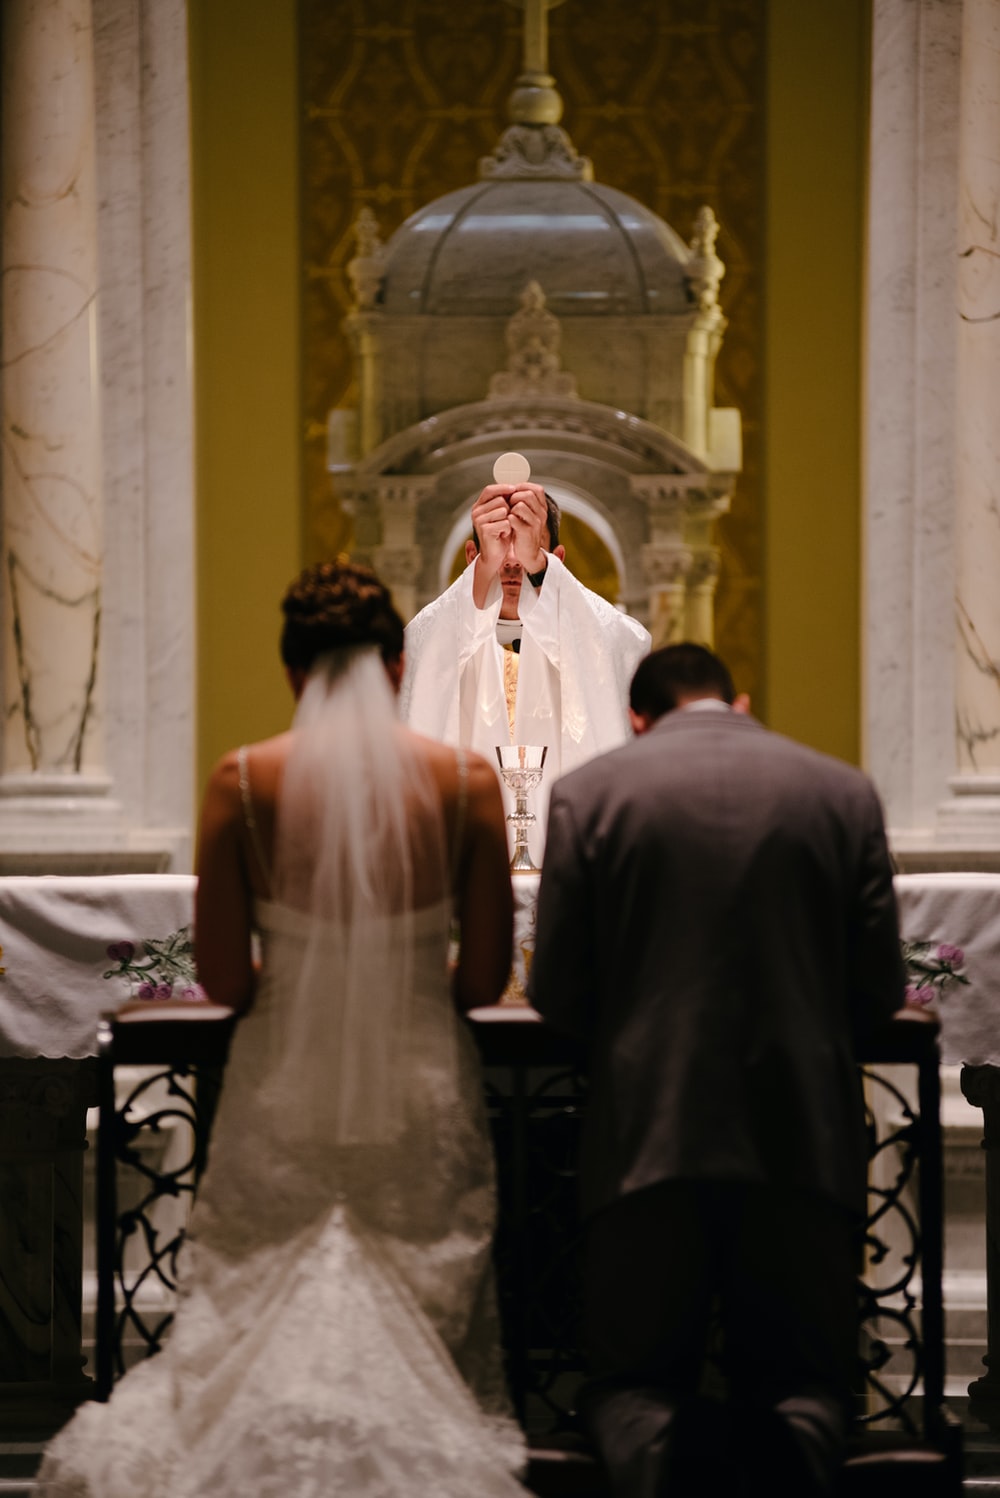 Church Wedding Picture. Download Free Image